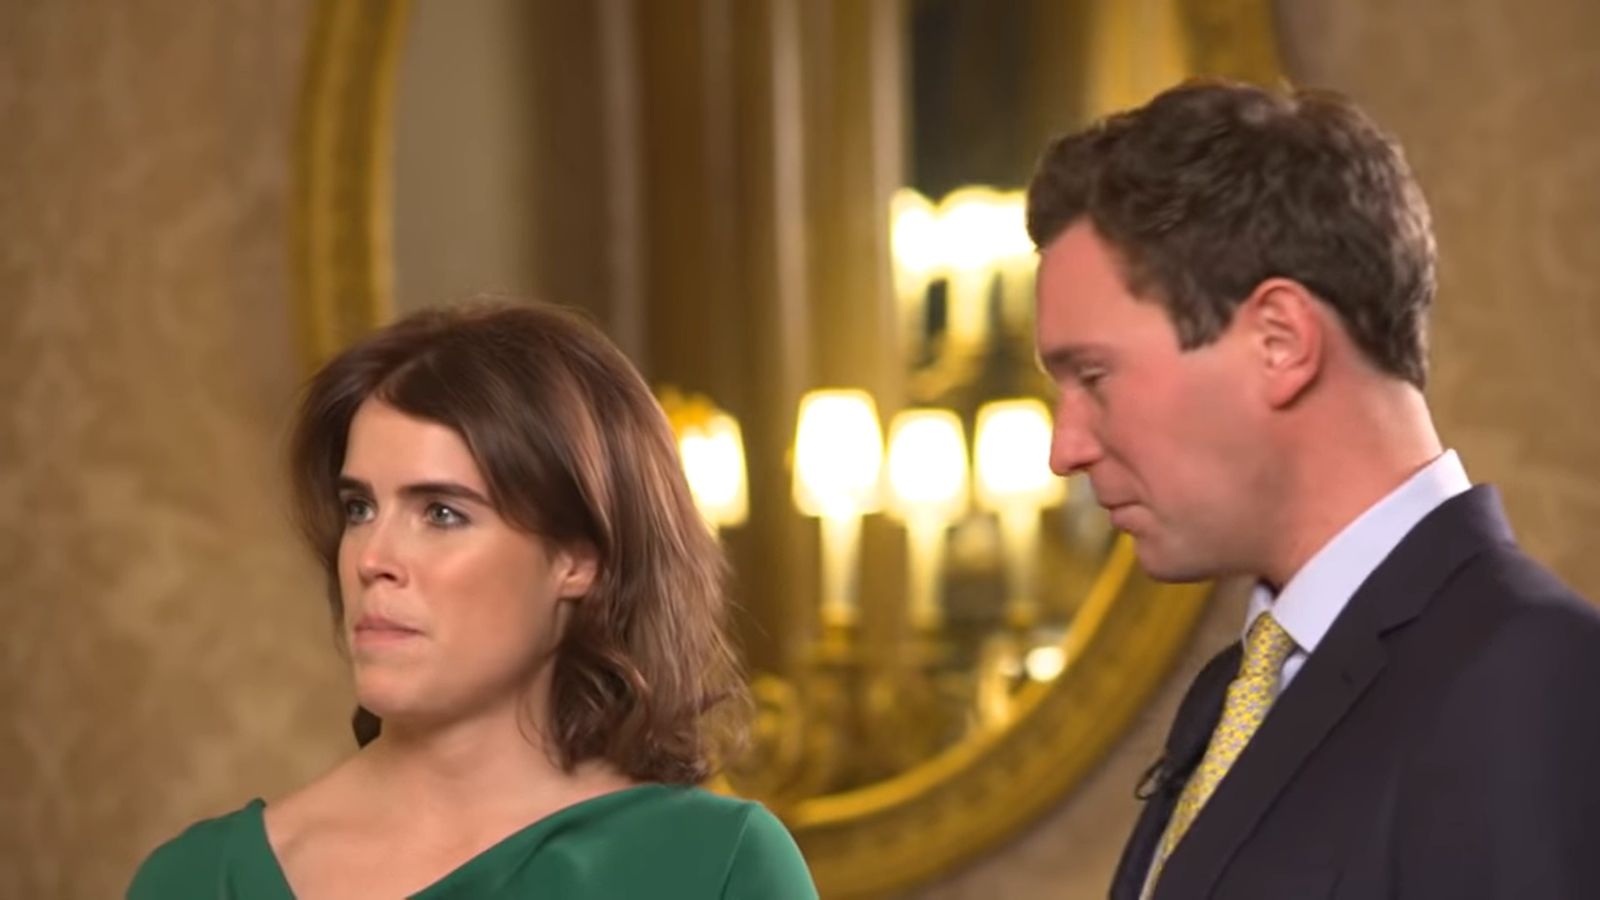 princess-eugenie-shock-prince-andrews-daughter-made-cheeky-remarks-at-her-royal-wedding-jack-brooksbanks-wife-smitten-with-him